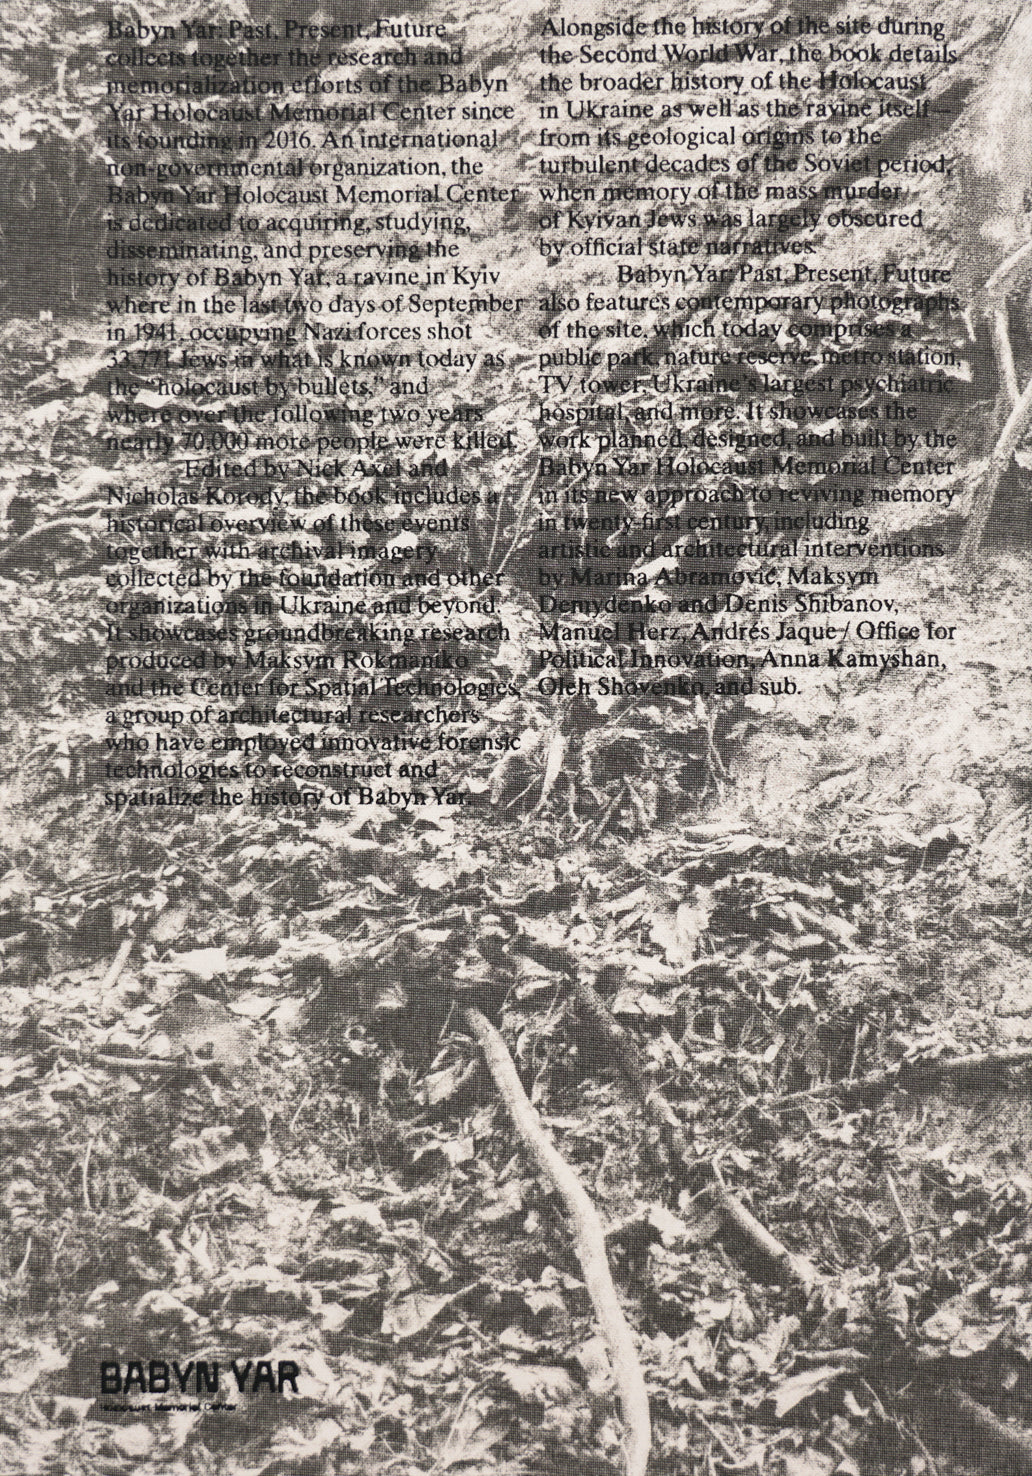 Book back with black and white photo of overgrown branches in the dust and two columns of black serif text covering the page. On the lowest left corner of the page it says Babyn Yar Memorial Center. 